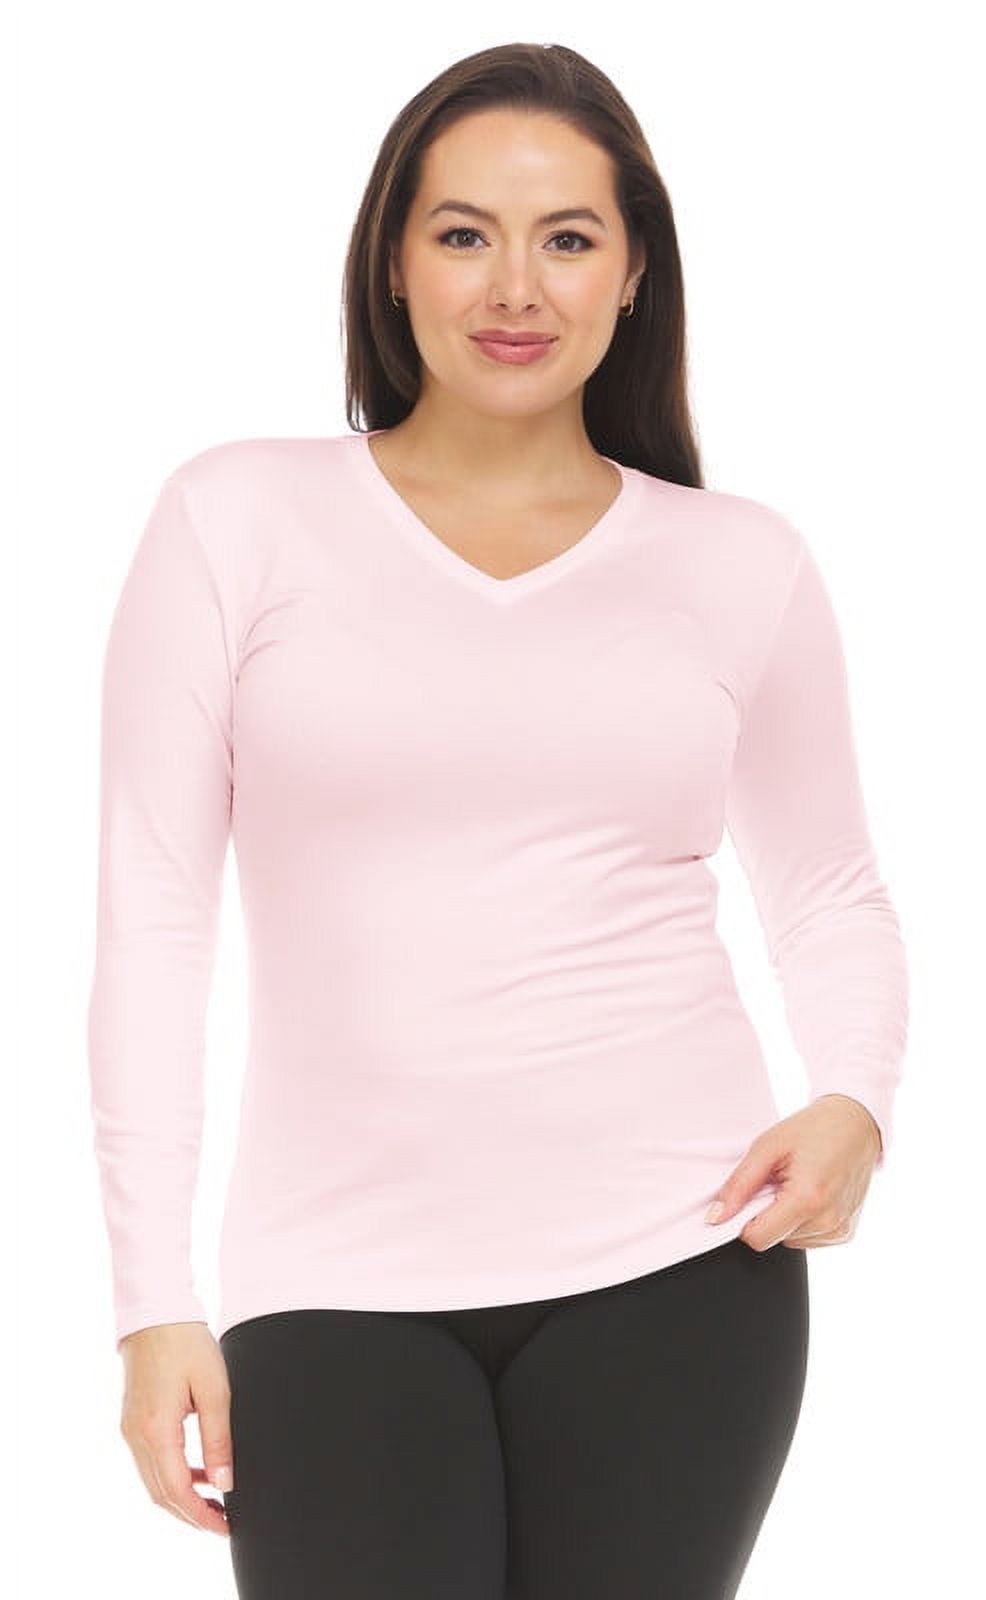 Thermajane Thermal Shirts for Women V Neck Long Sleeve Winter Tops